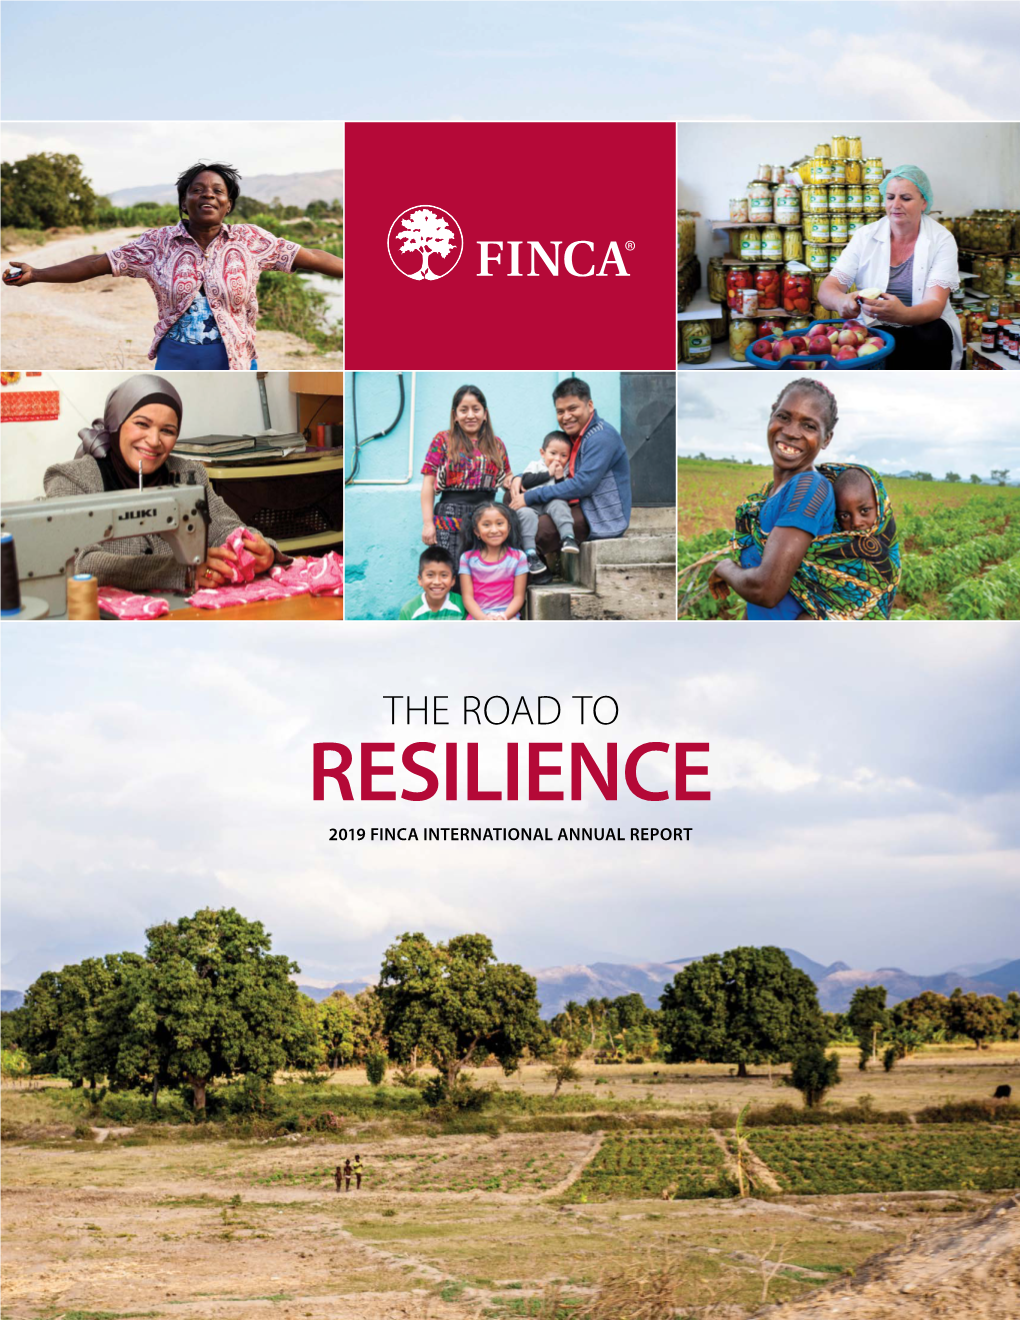 Resilience 2019 Finca International Annual Report 2019 Finca International Annual Report